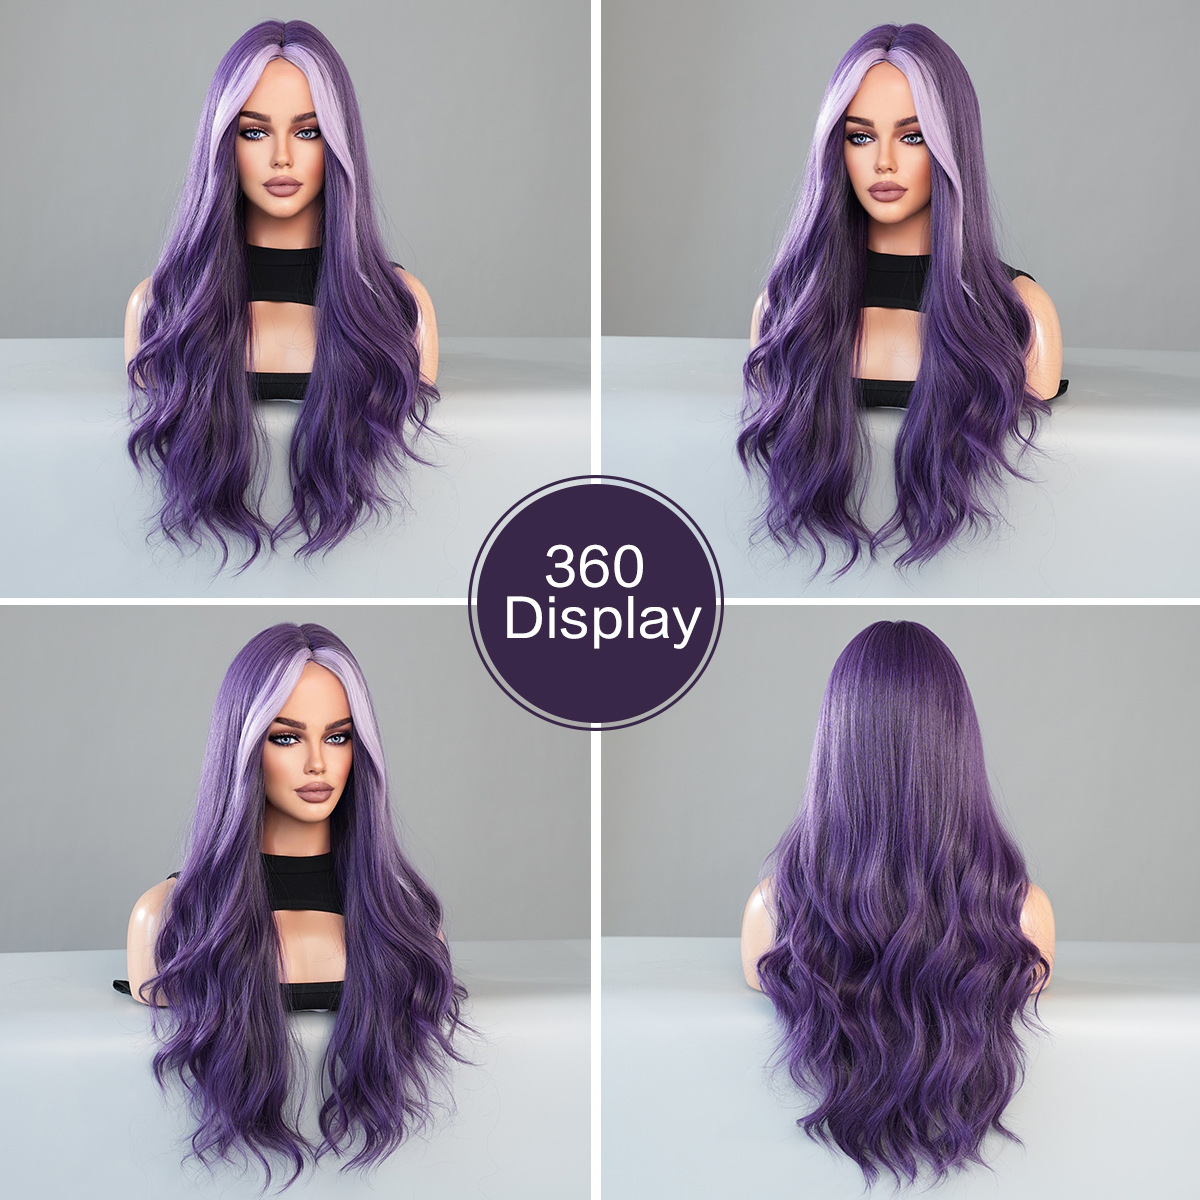 Get ready-to-go glamour with this large wavy synthetic wig, showcasing stunning purple highlights for a stylish finish